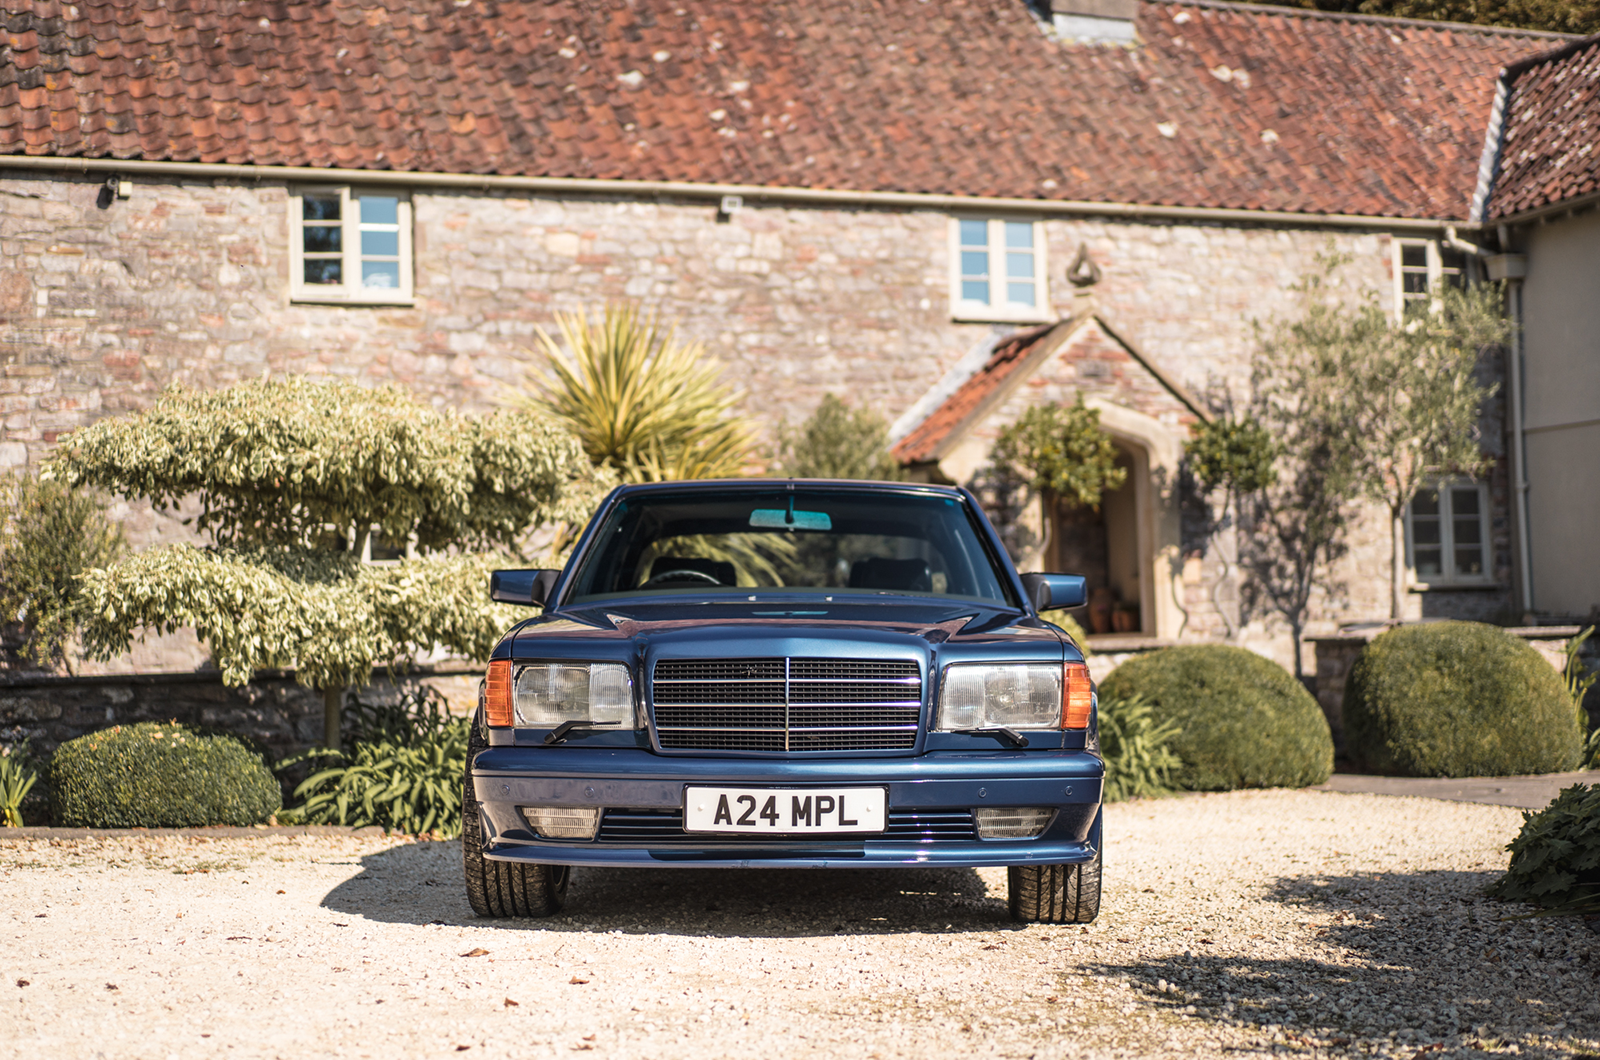 Classic & Sports Car – Want to own Paul McCartney’s Mercedes?